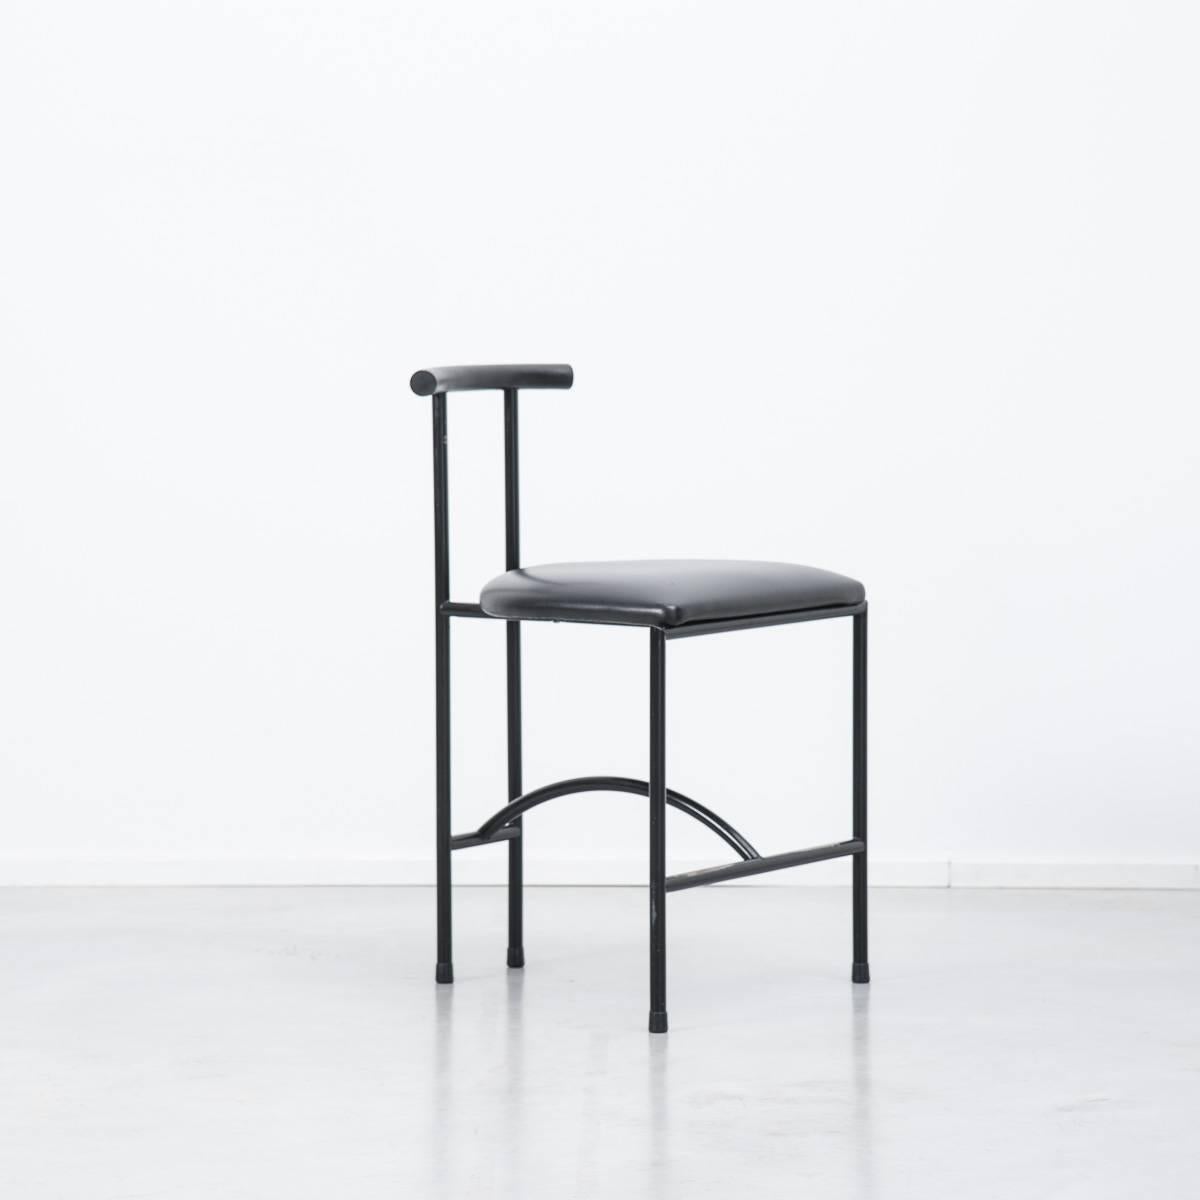 A Tokyo chair designed by Rodney Kinsman for Italian manufacturer, Bieffeplast. Chrome tubular frames with black rubber backrests and black semi leather seats.